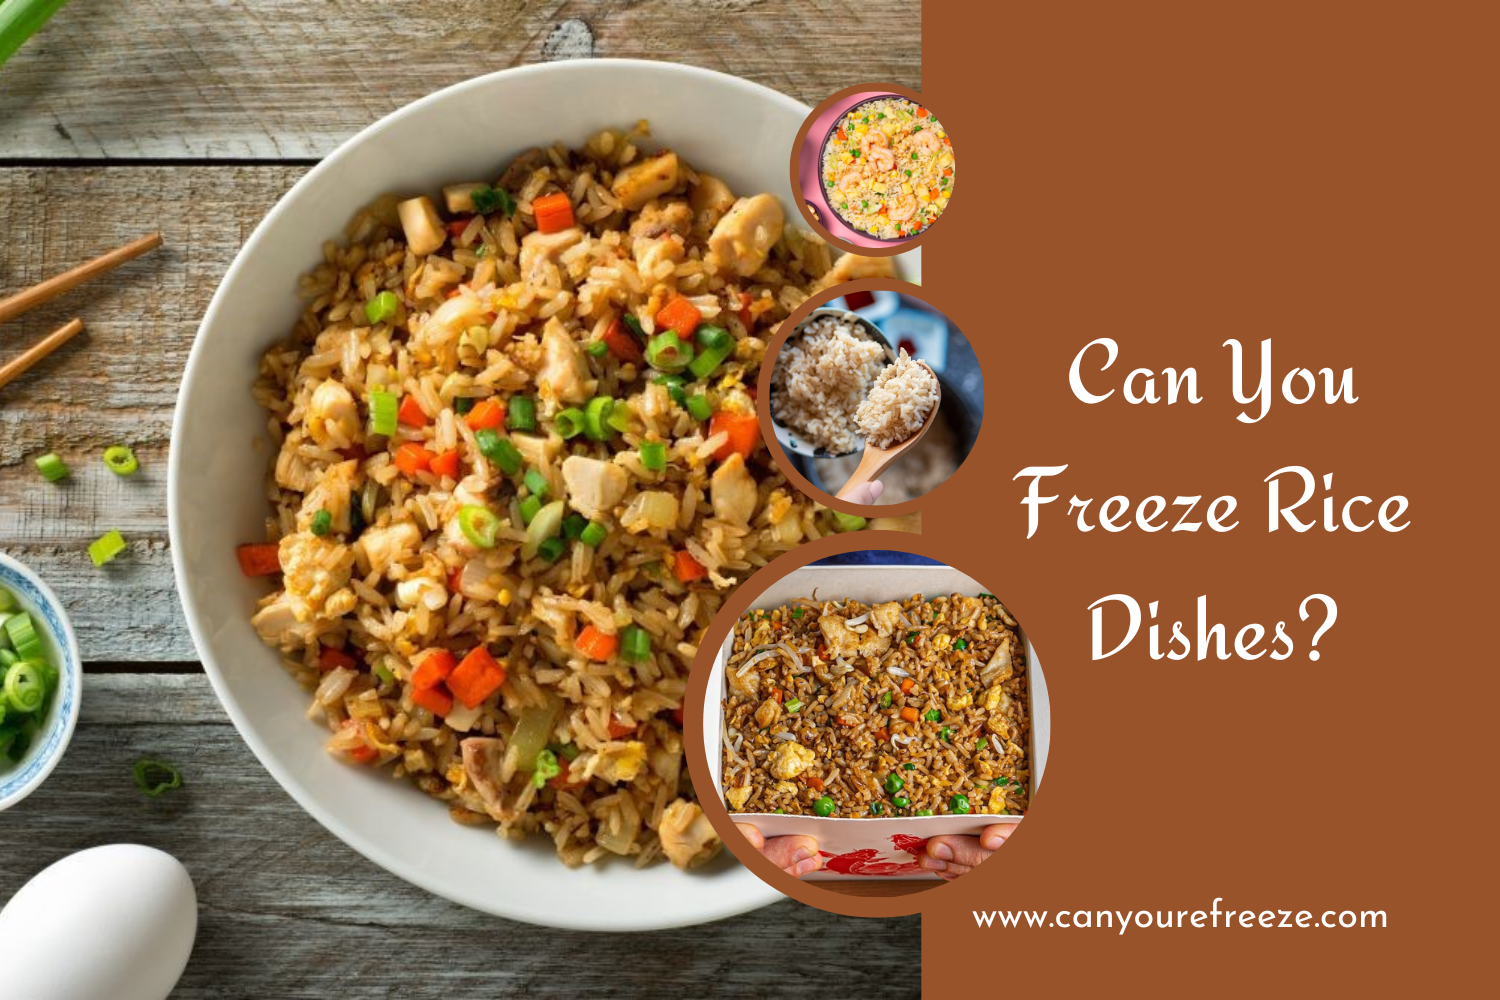 Can You Freeze Rice Dishes